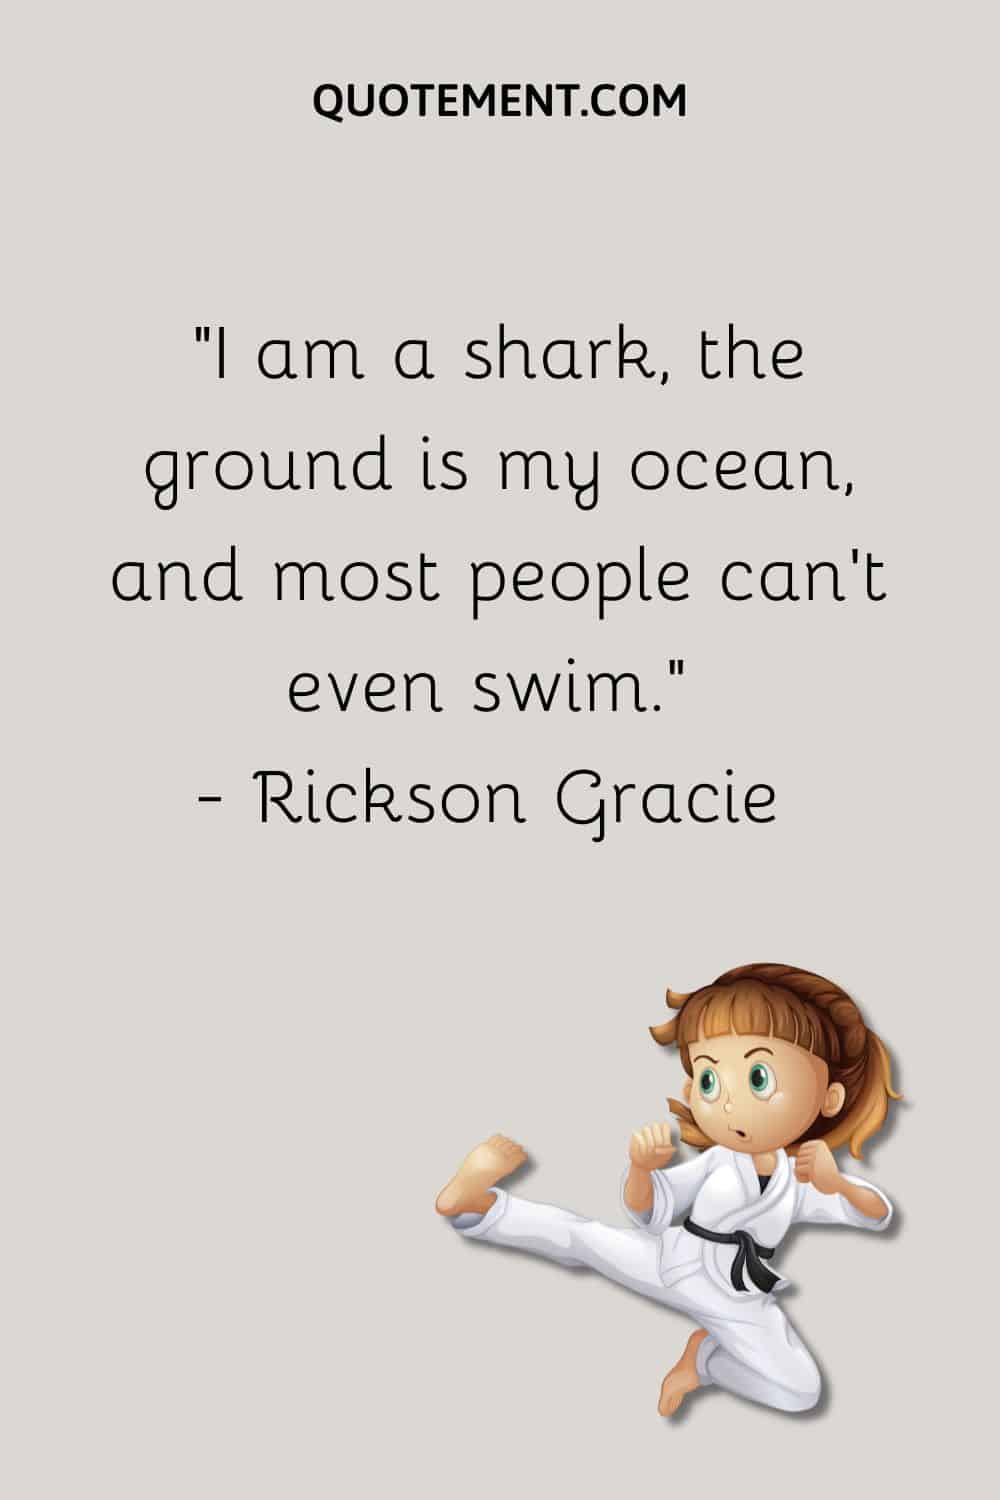 I am a shark, the ground is my ocean, and most people can't even swim